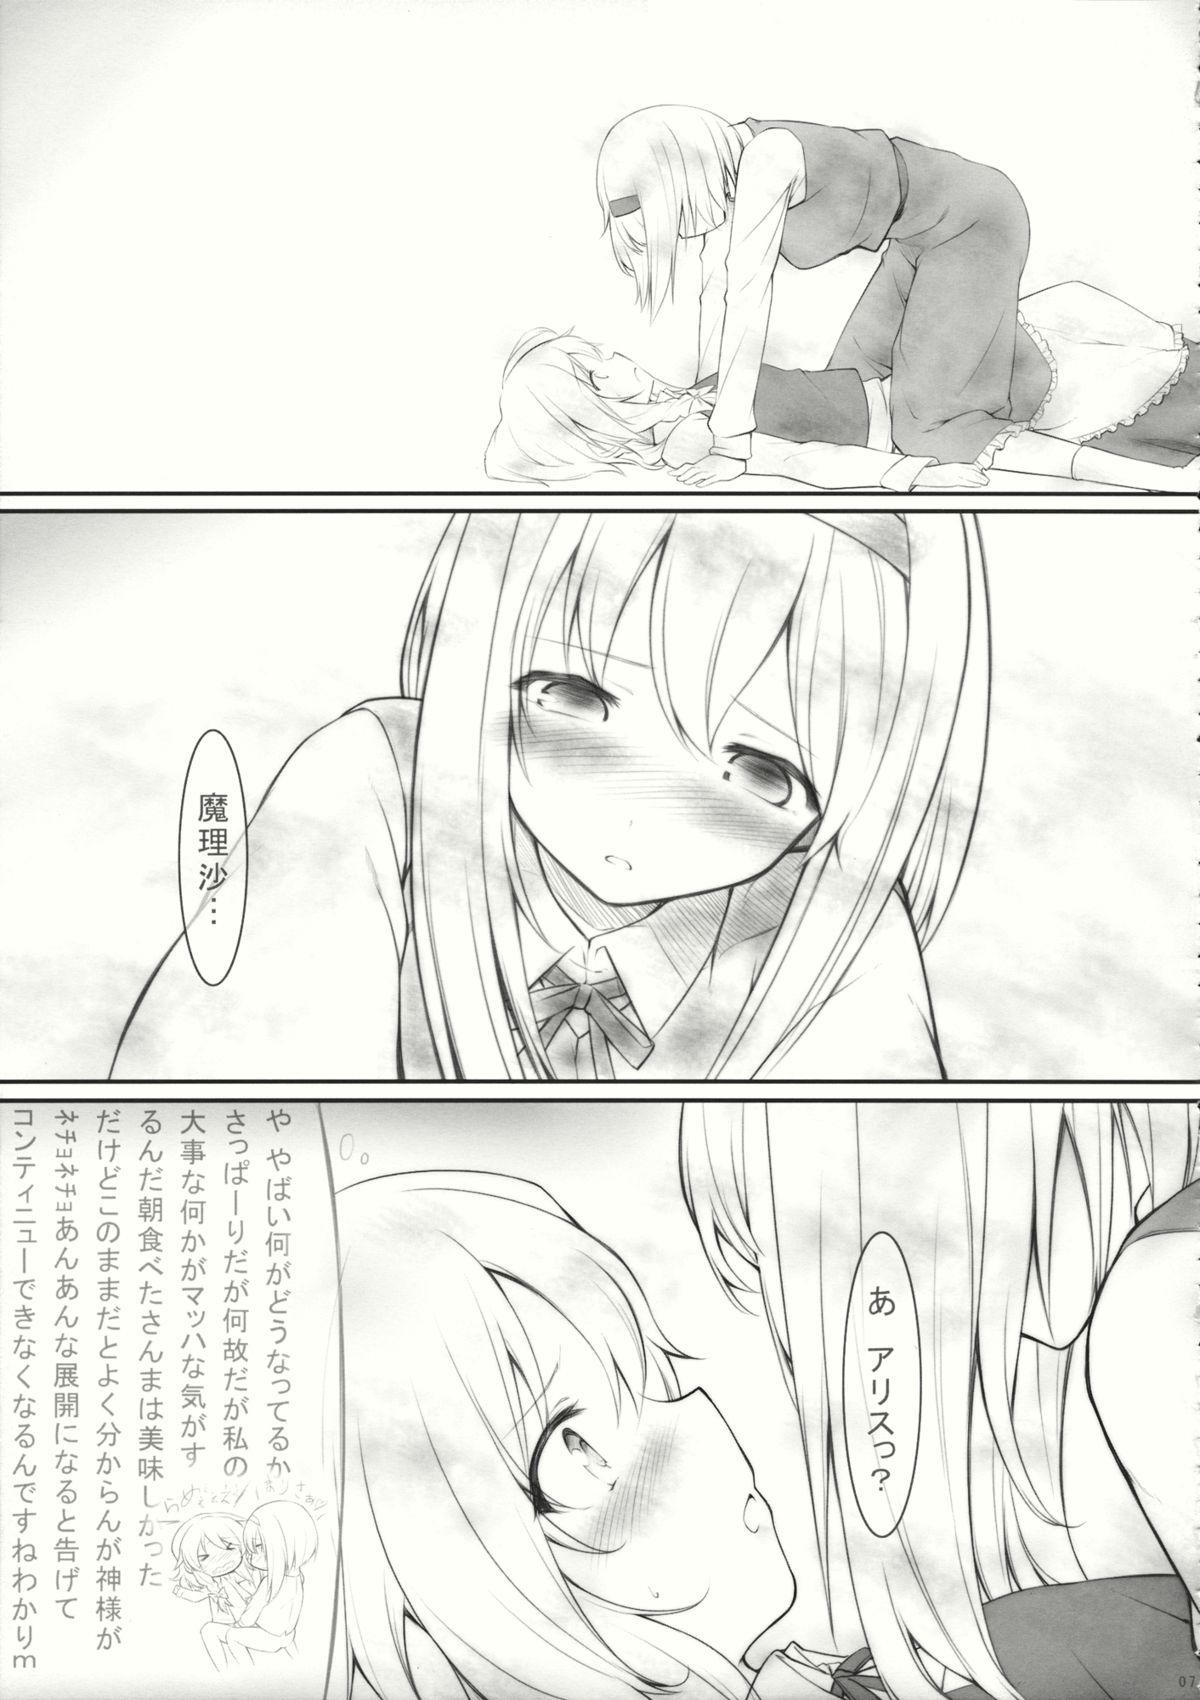 Gay 3some kiss or kiss? - Touhou project Amateur Free Porn - Page 6